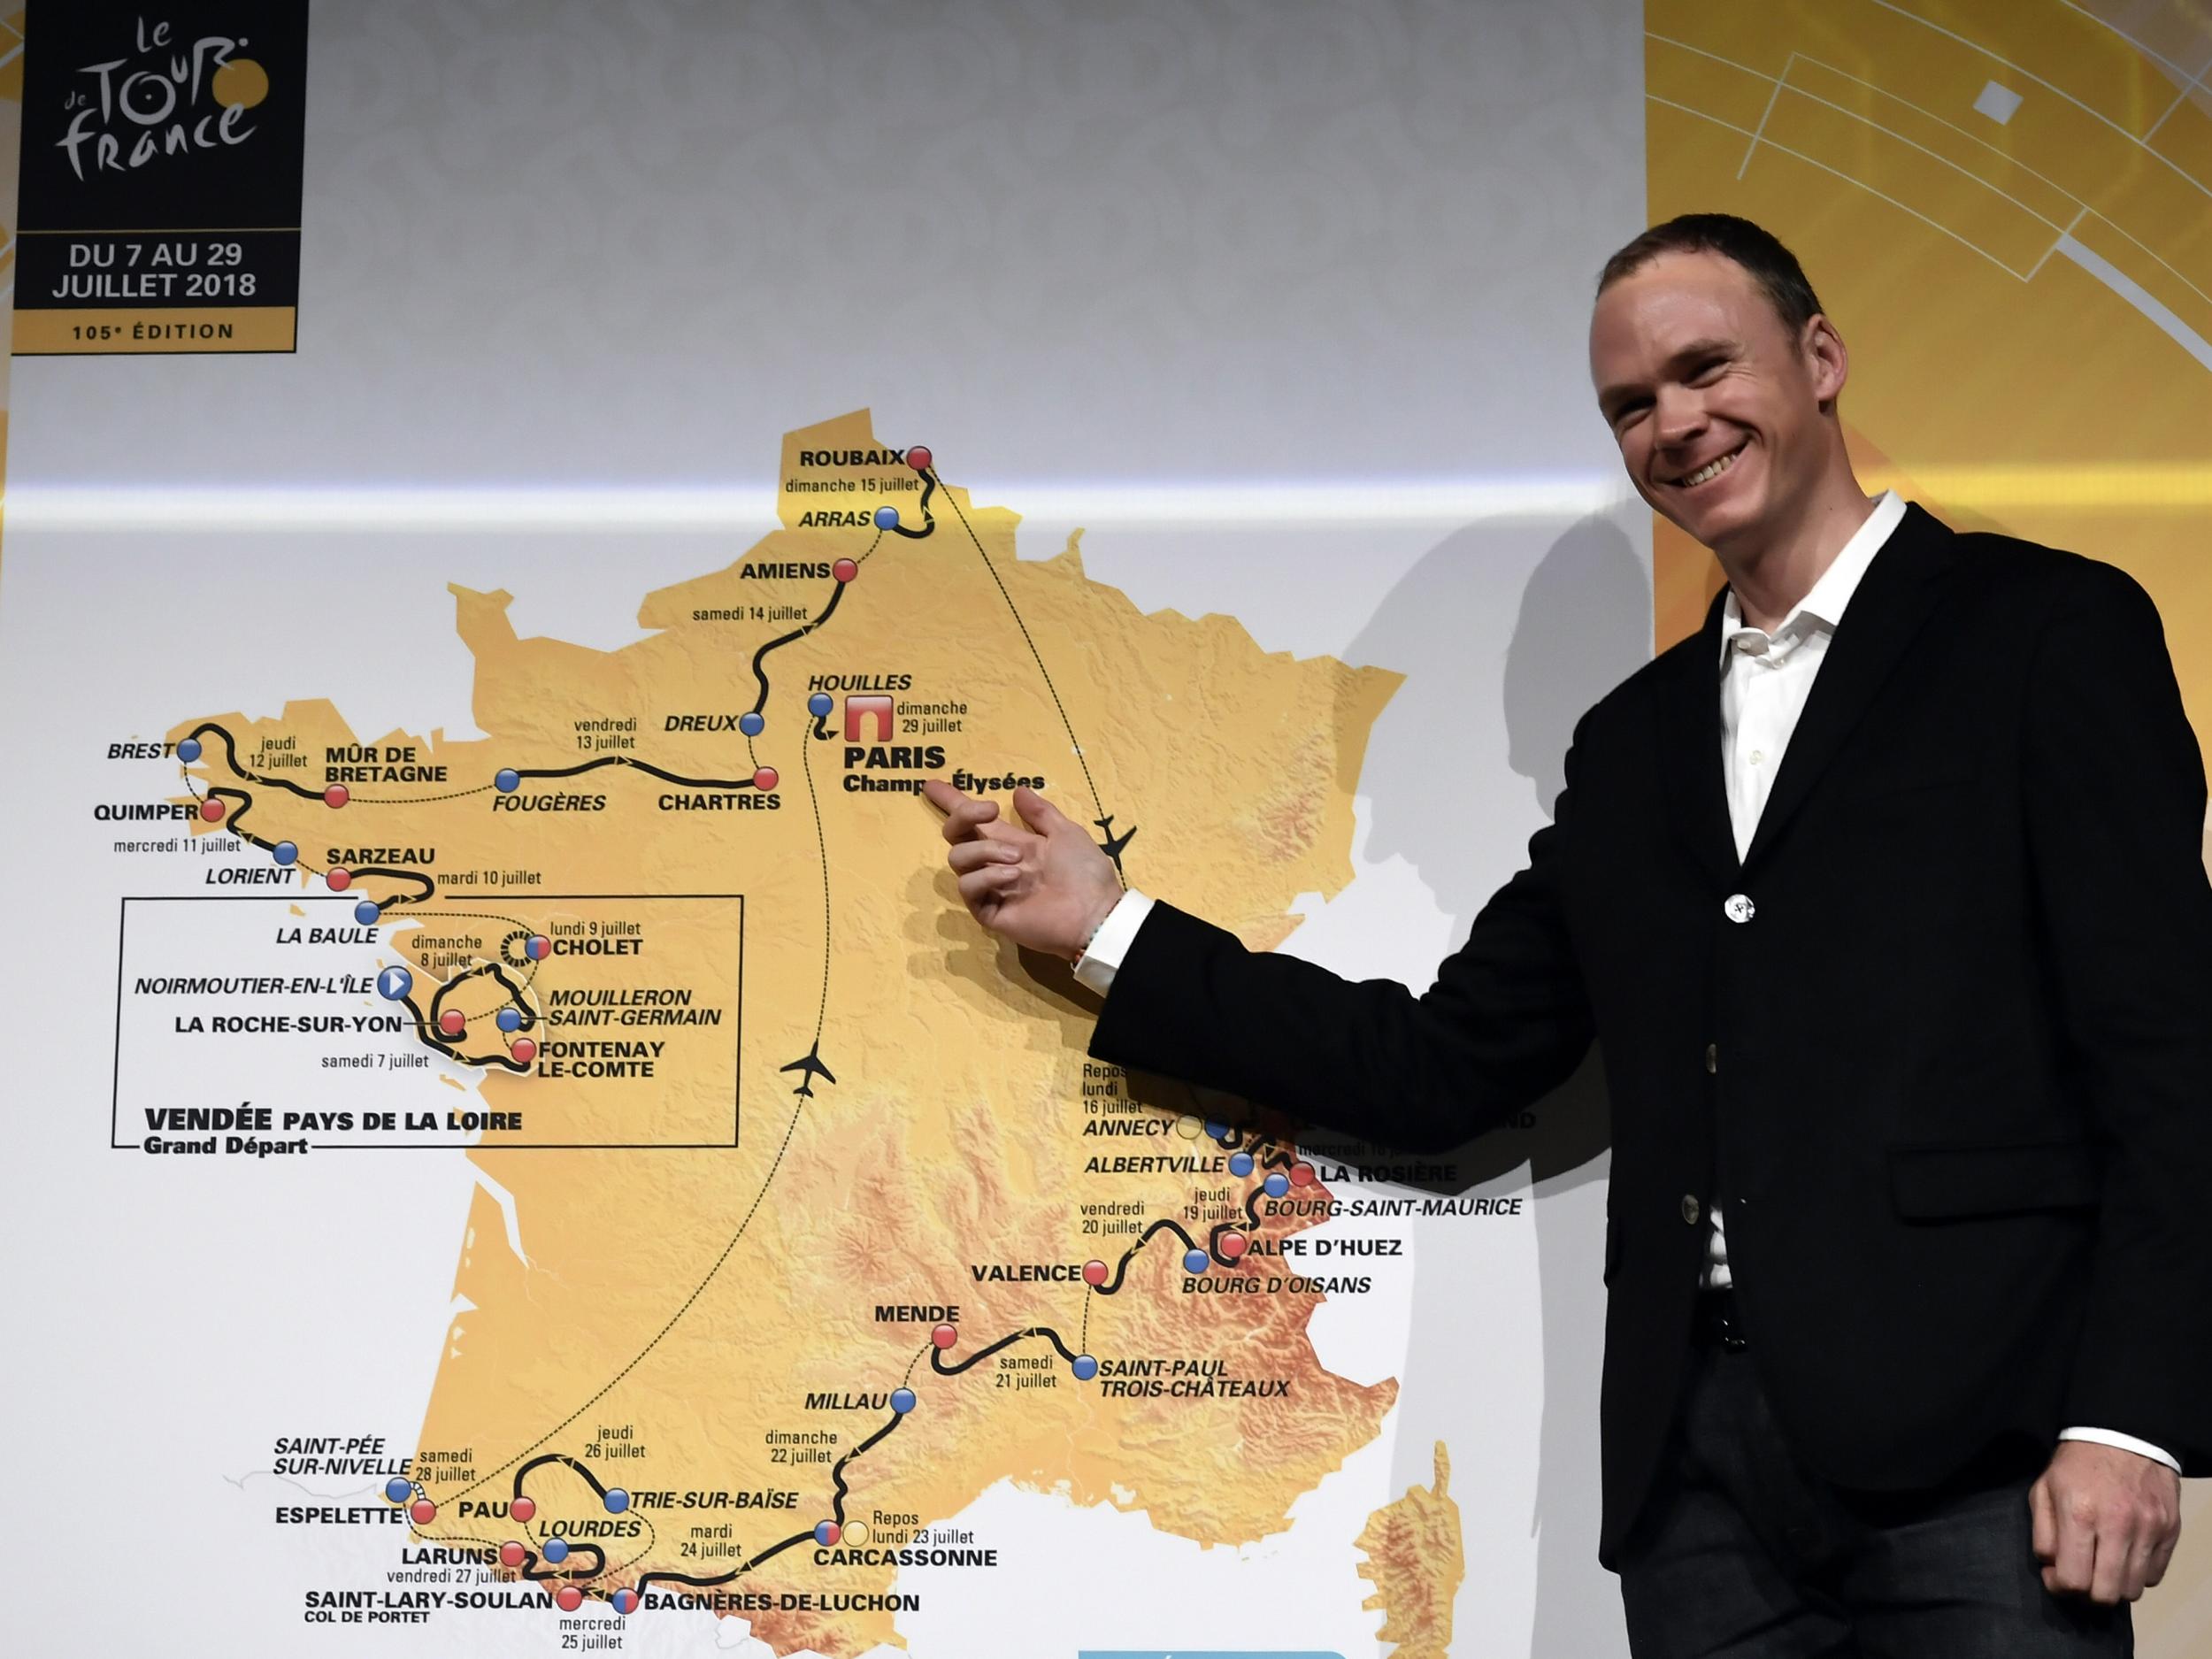 Froome said the Tour will test every aspect of cycling